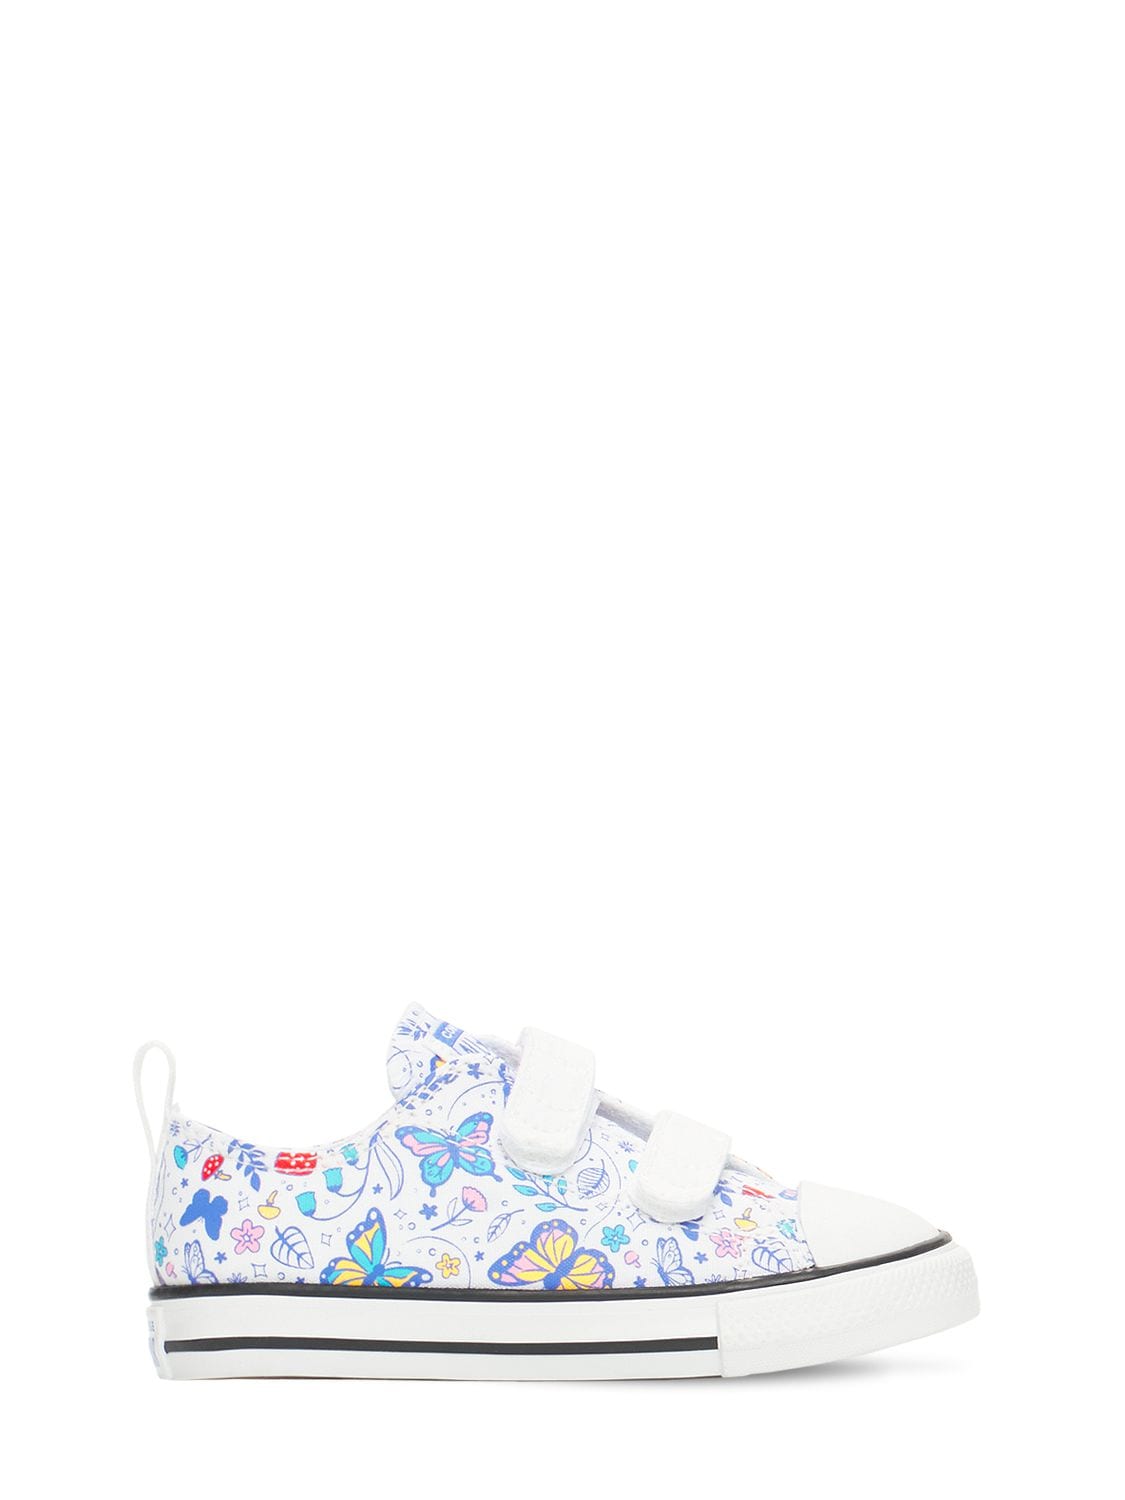 Image of Butterfly Chuck Taylor All Star Sneakers